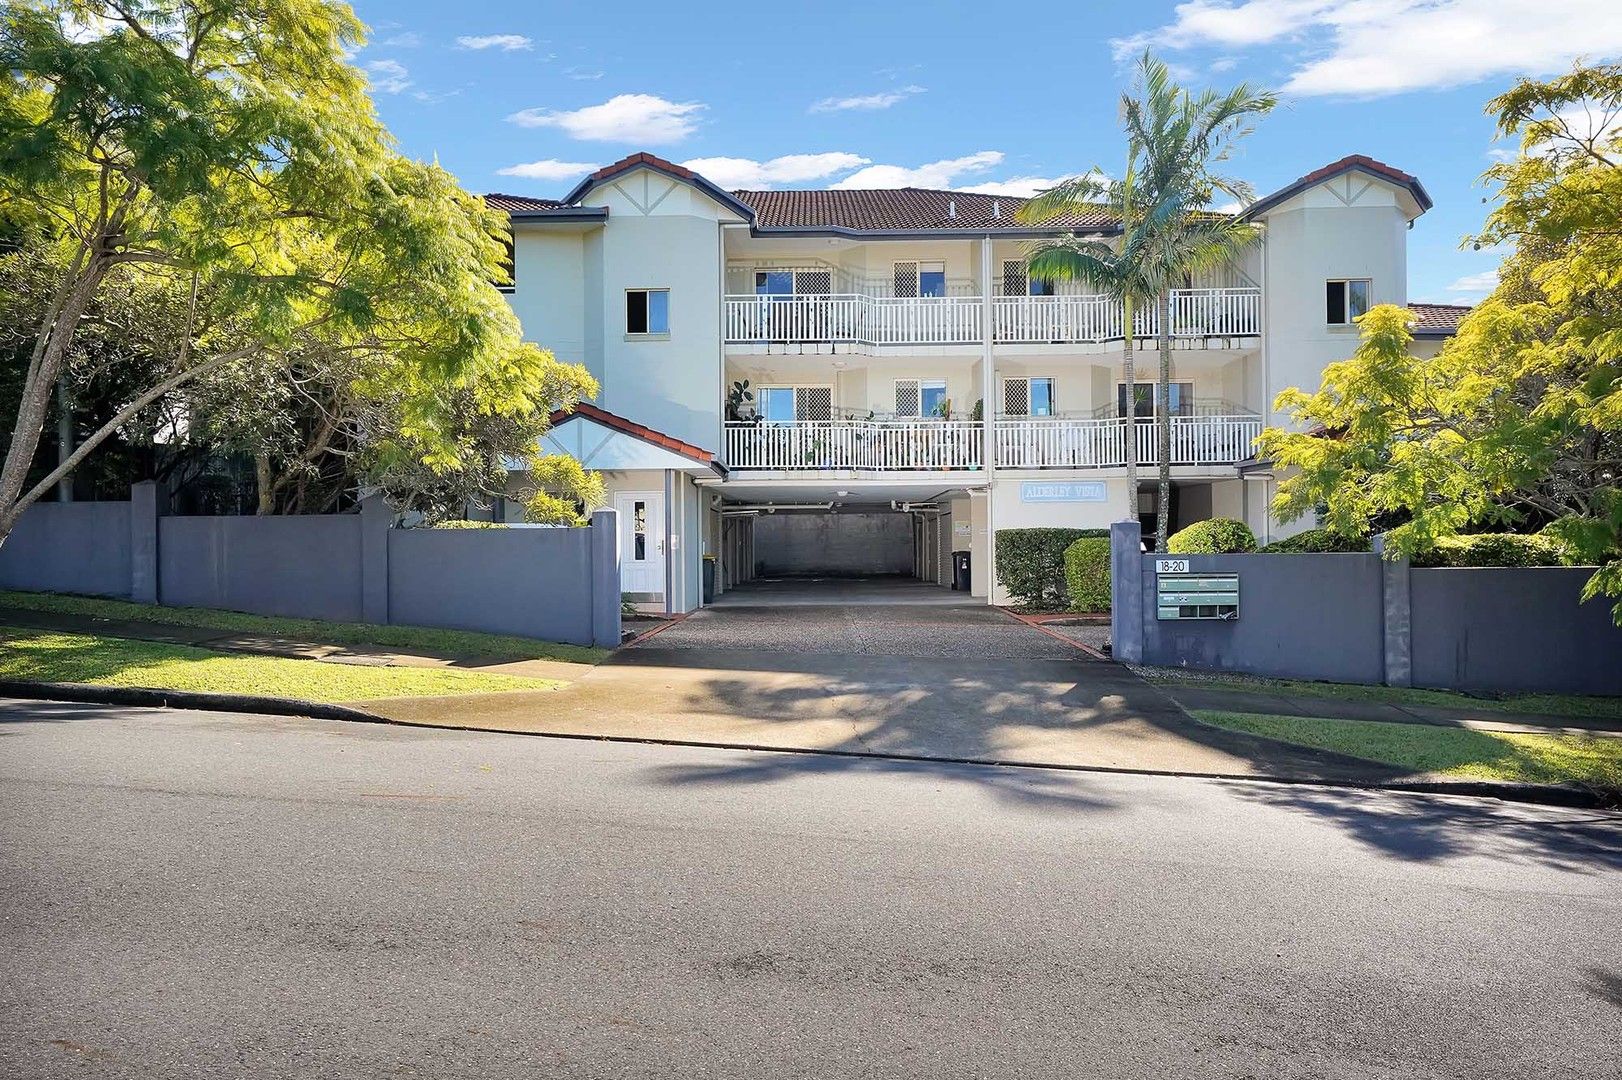 3 bedrooms Apartment / Unit / Flat in 6/18 Frederick St ALDERLEY QLD, 4051